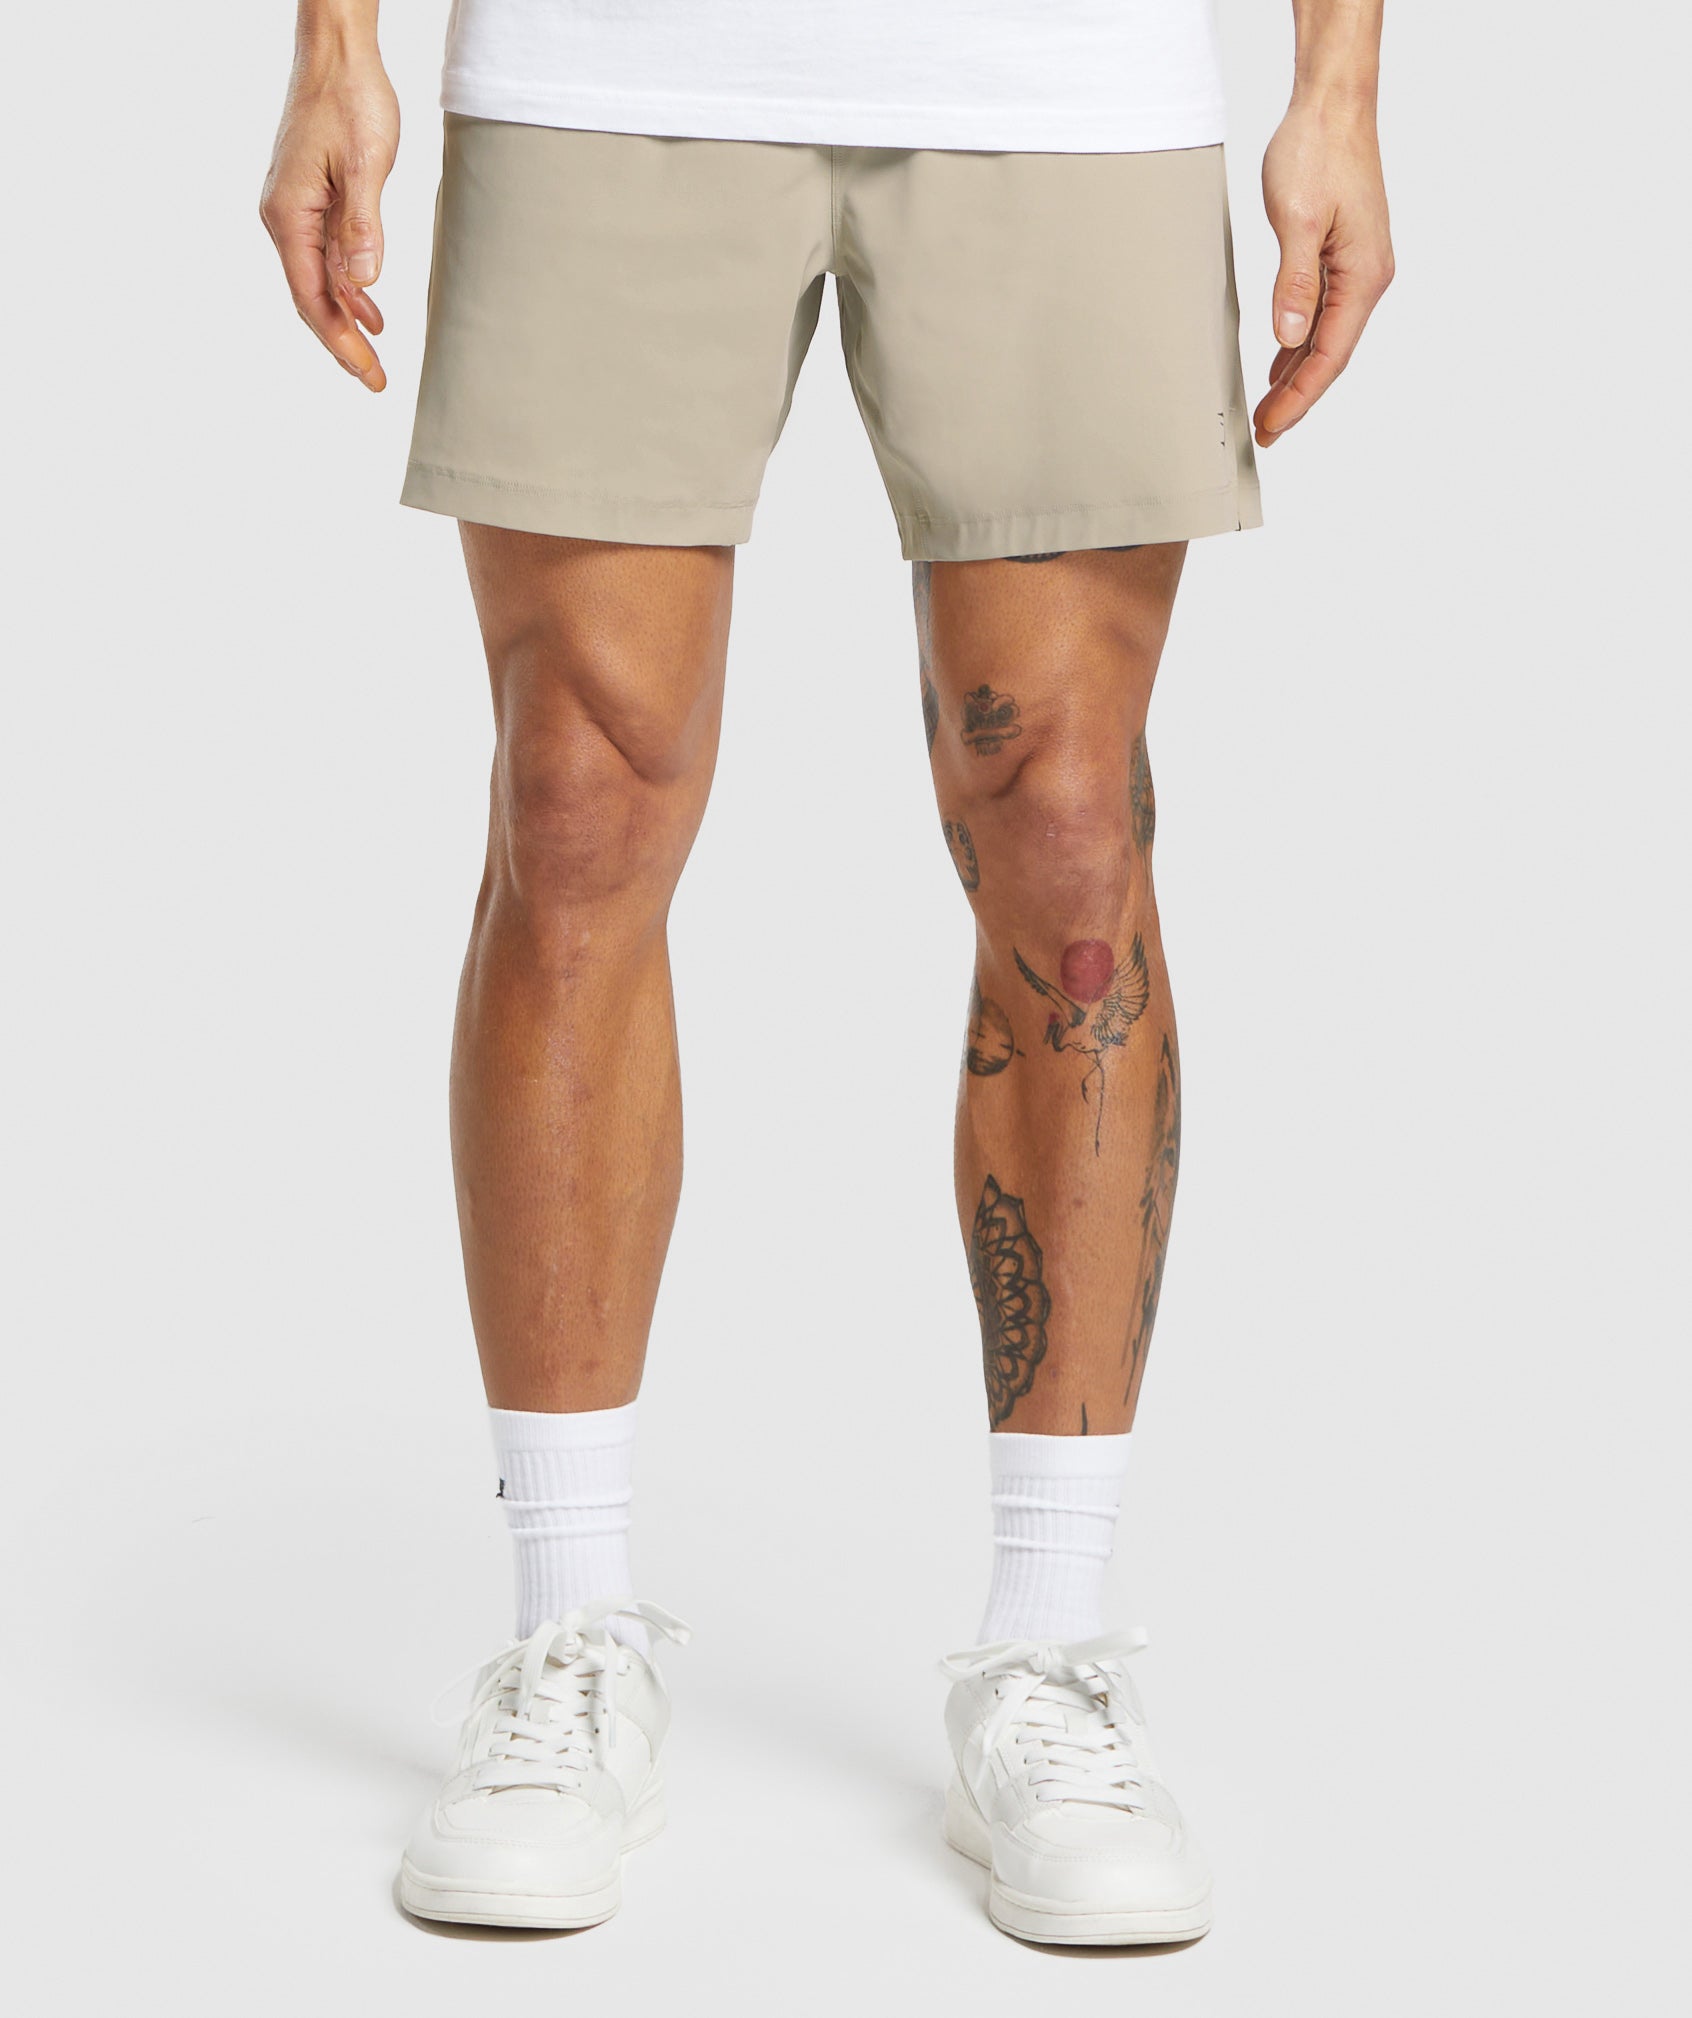 Studio 6" Shorts in Sand Brown - view 1